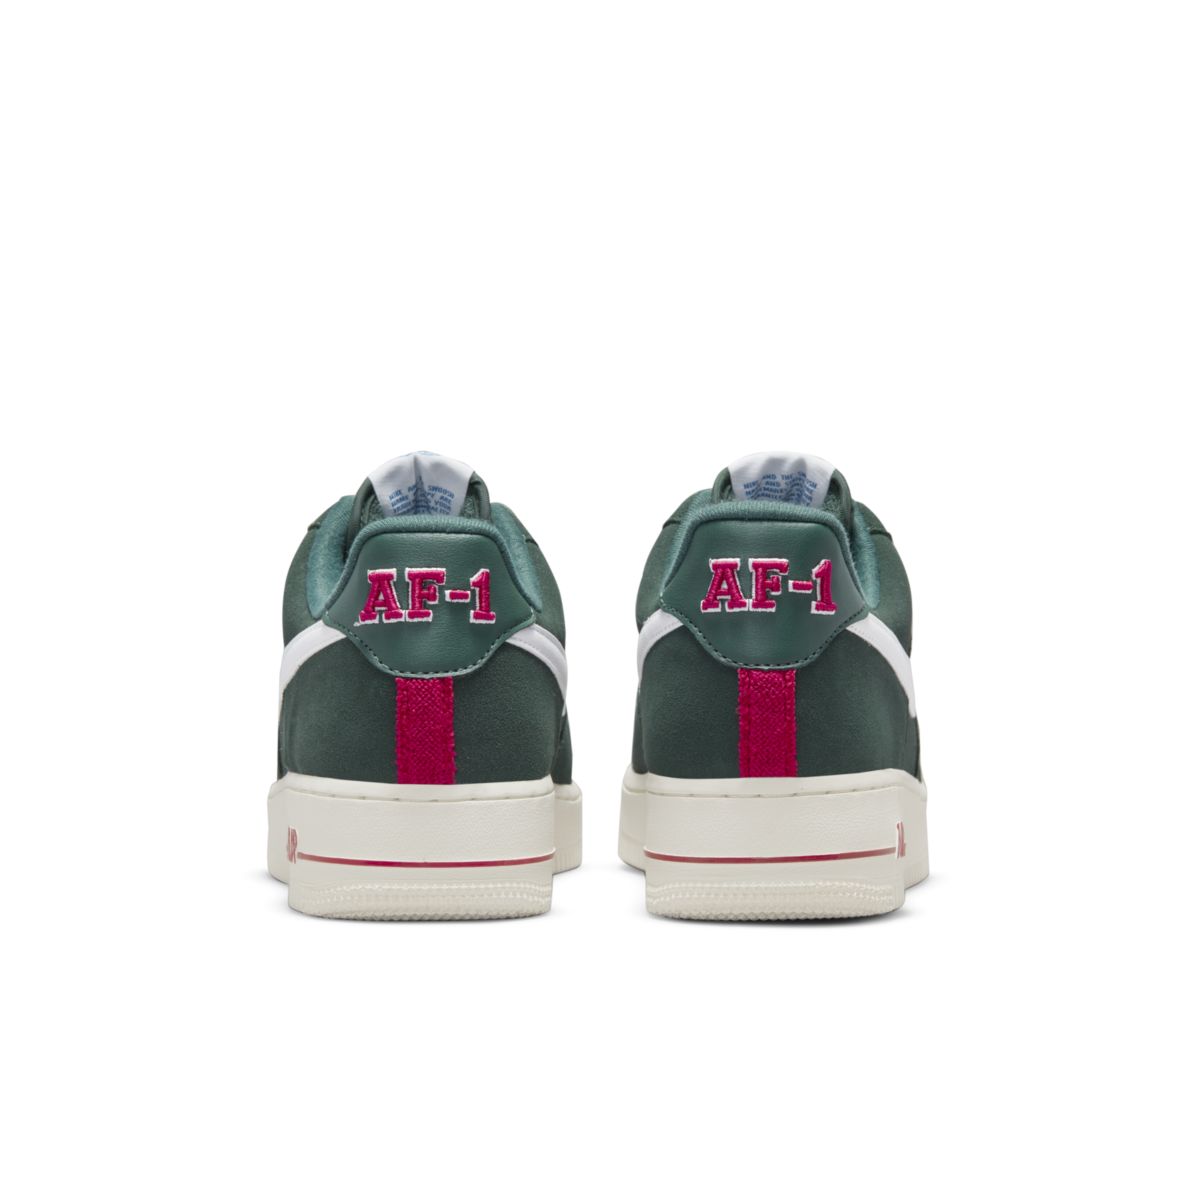 Nike Air Force 1 Low Athletic Club Pro Green DH7435-300 6